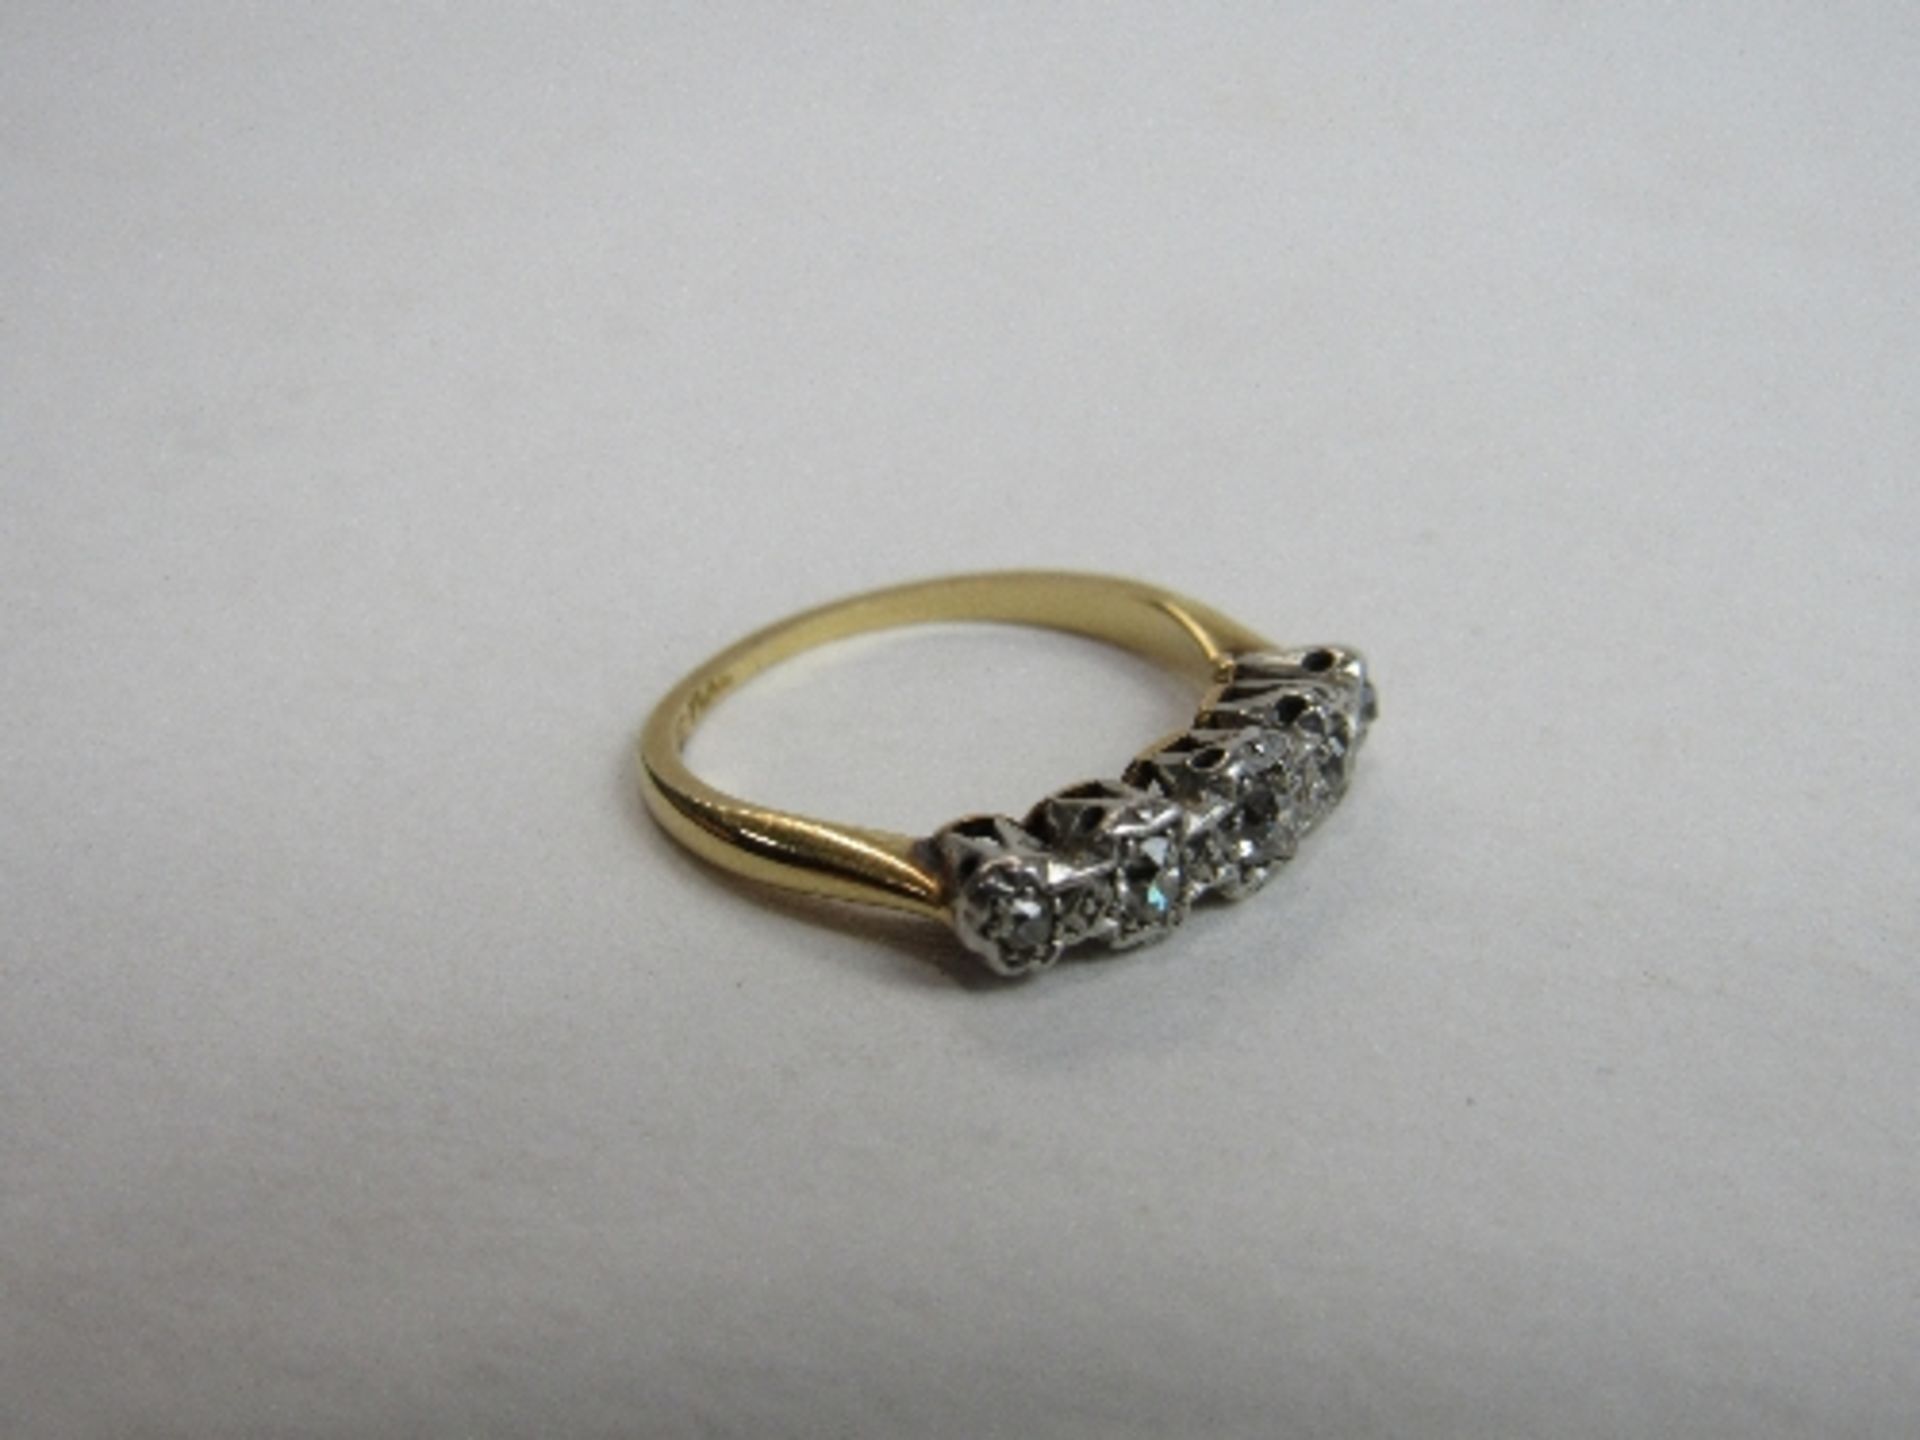 18ct gold & platinum ring set with 5 diamonds, size M, wt 3.2gms. Price guide £100-150. - Image 2 of 2